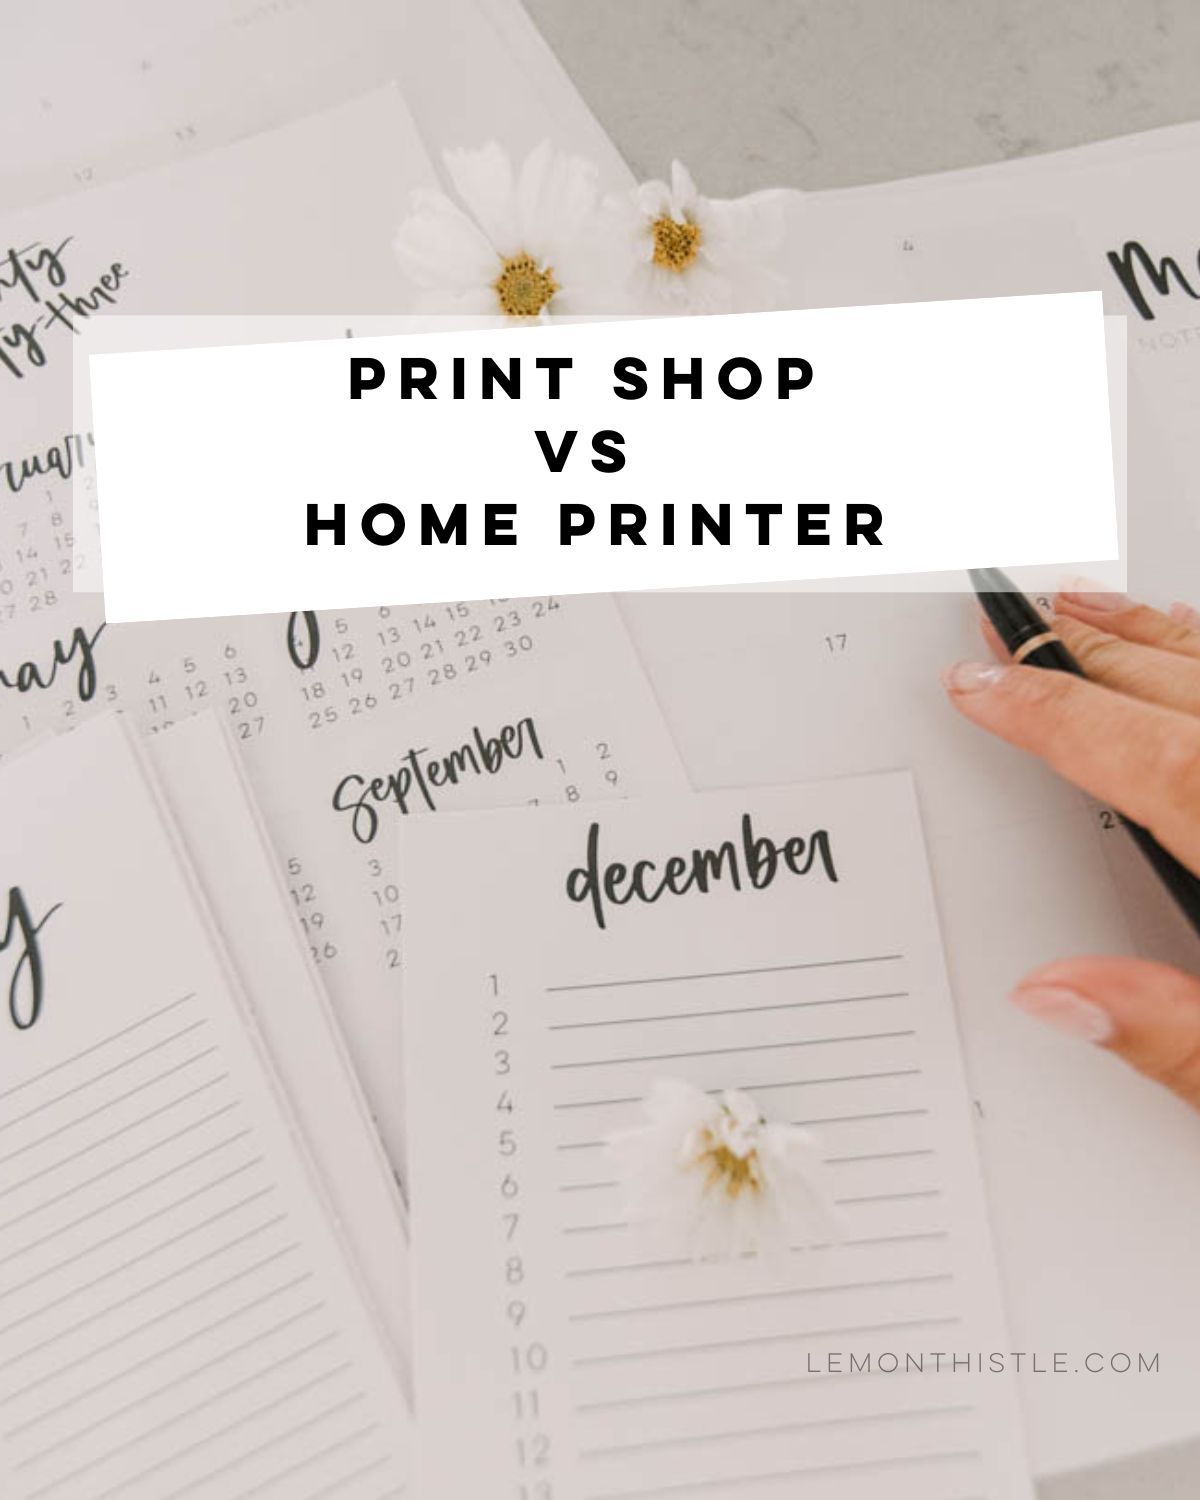 Print shop VS home printer for free printables | text over image of printed calendars in various sizes